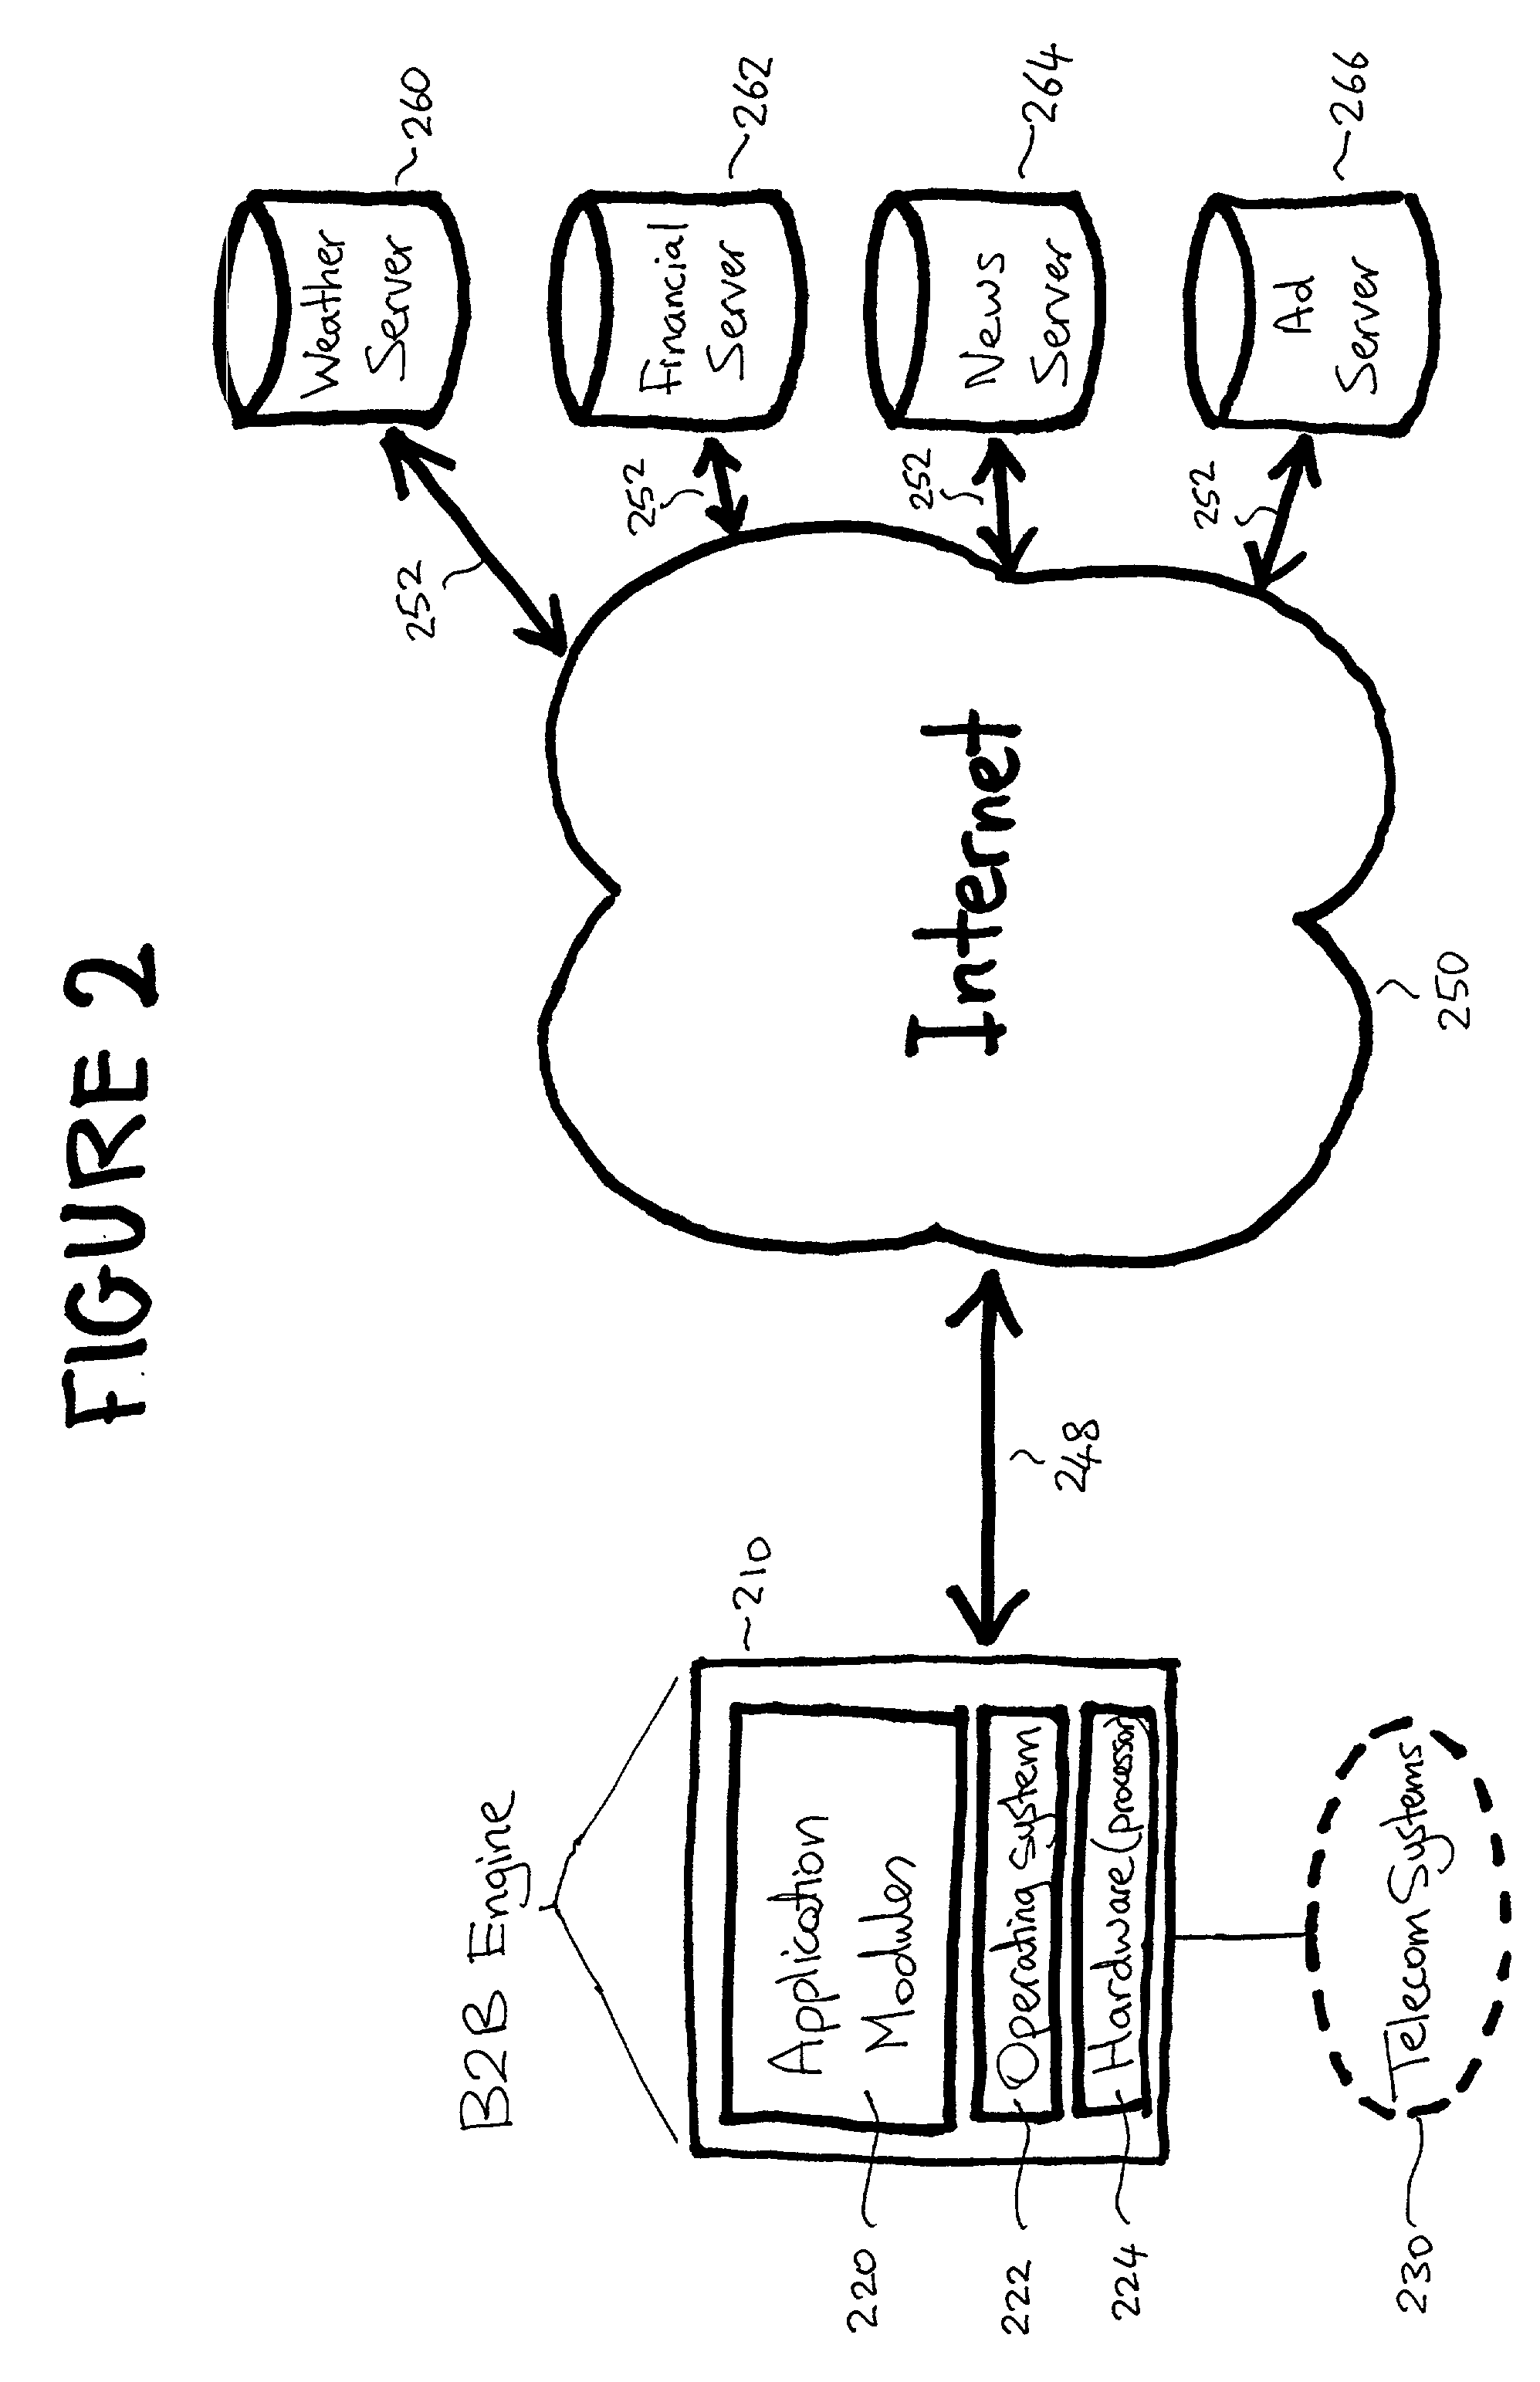 System, method and apparatus for polling telecommunications nodes for real-time information